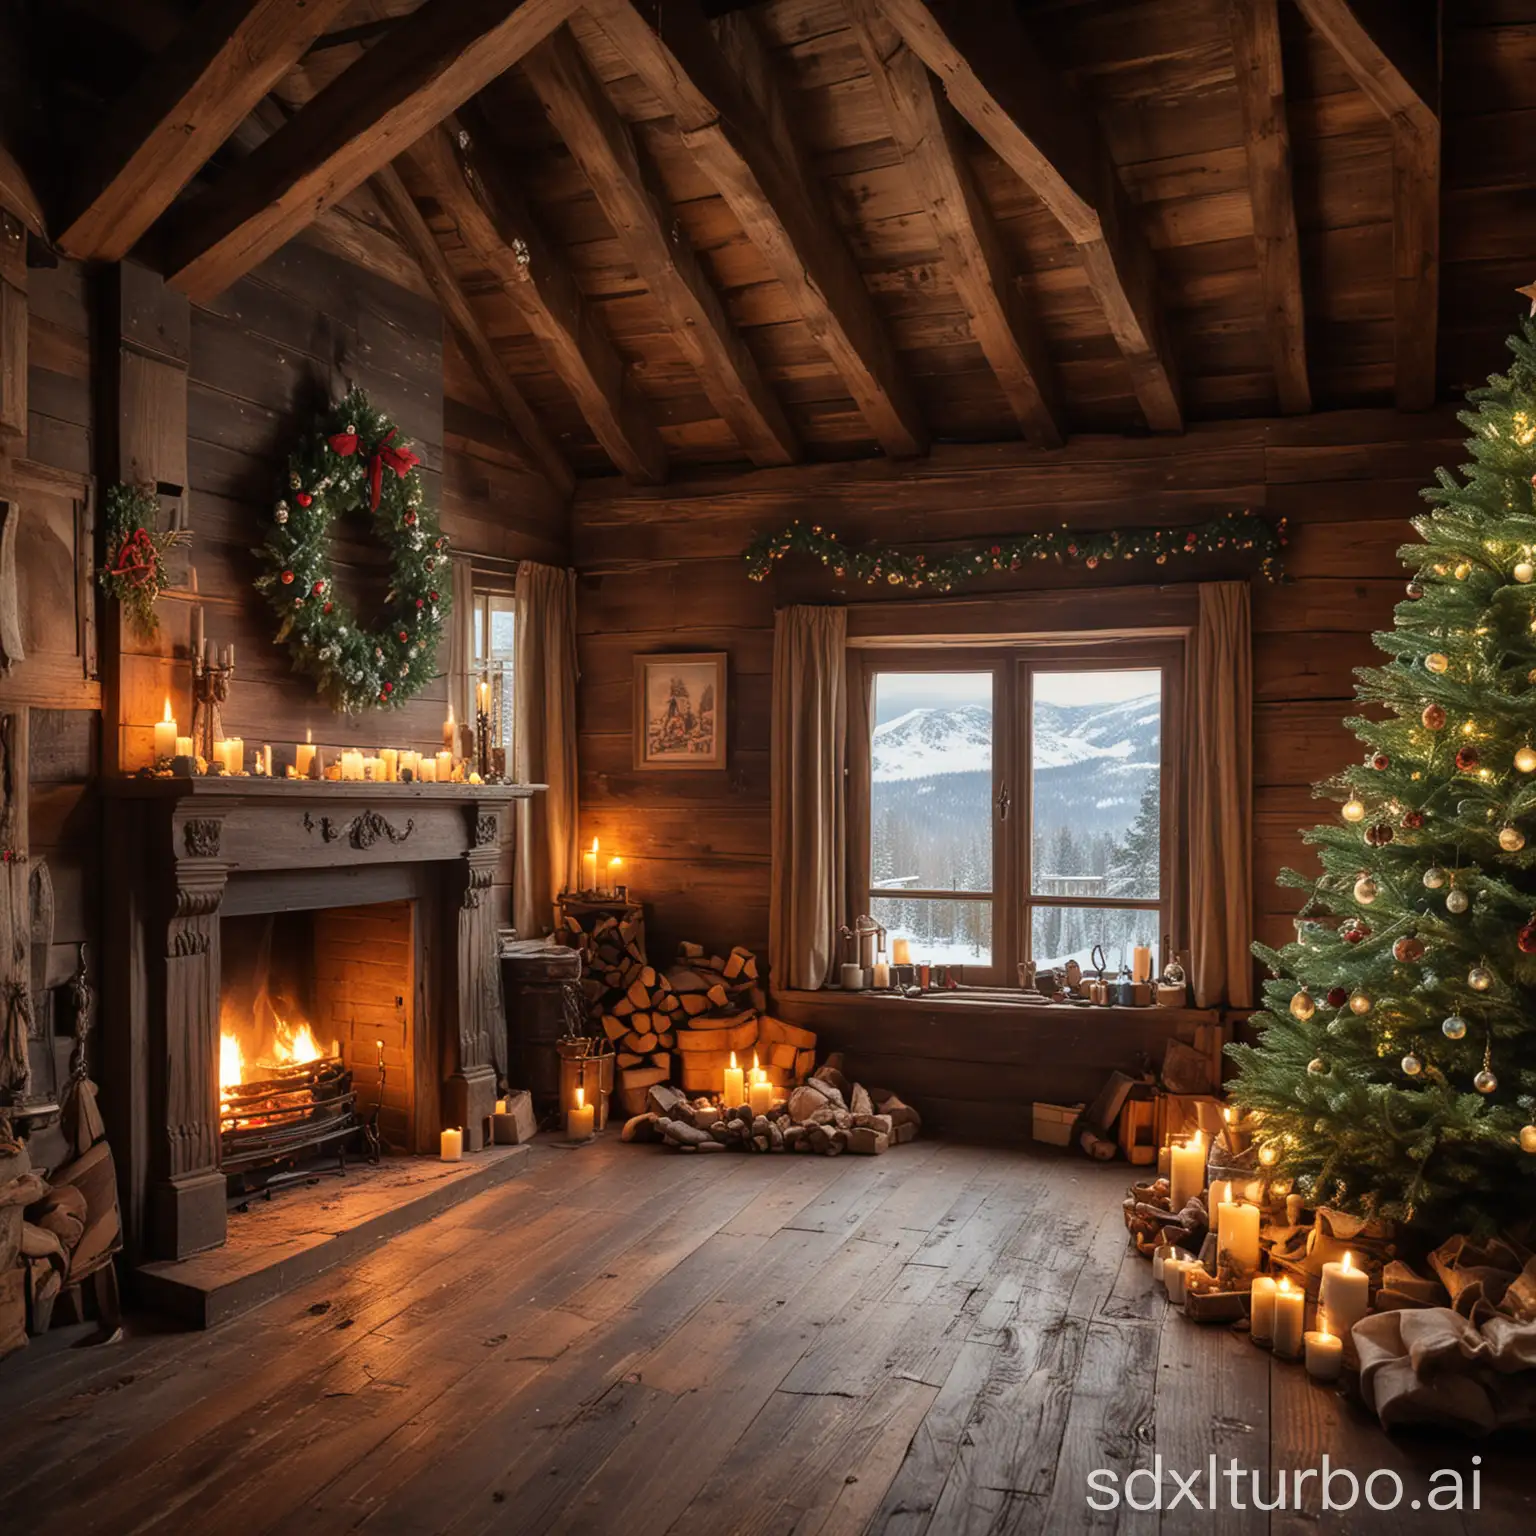 Romantic picture of an old wooden room with a fireplace with a Christmas tree on which the ornaments are and on which the candles are burning, from the window you can see the white mountains